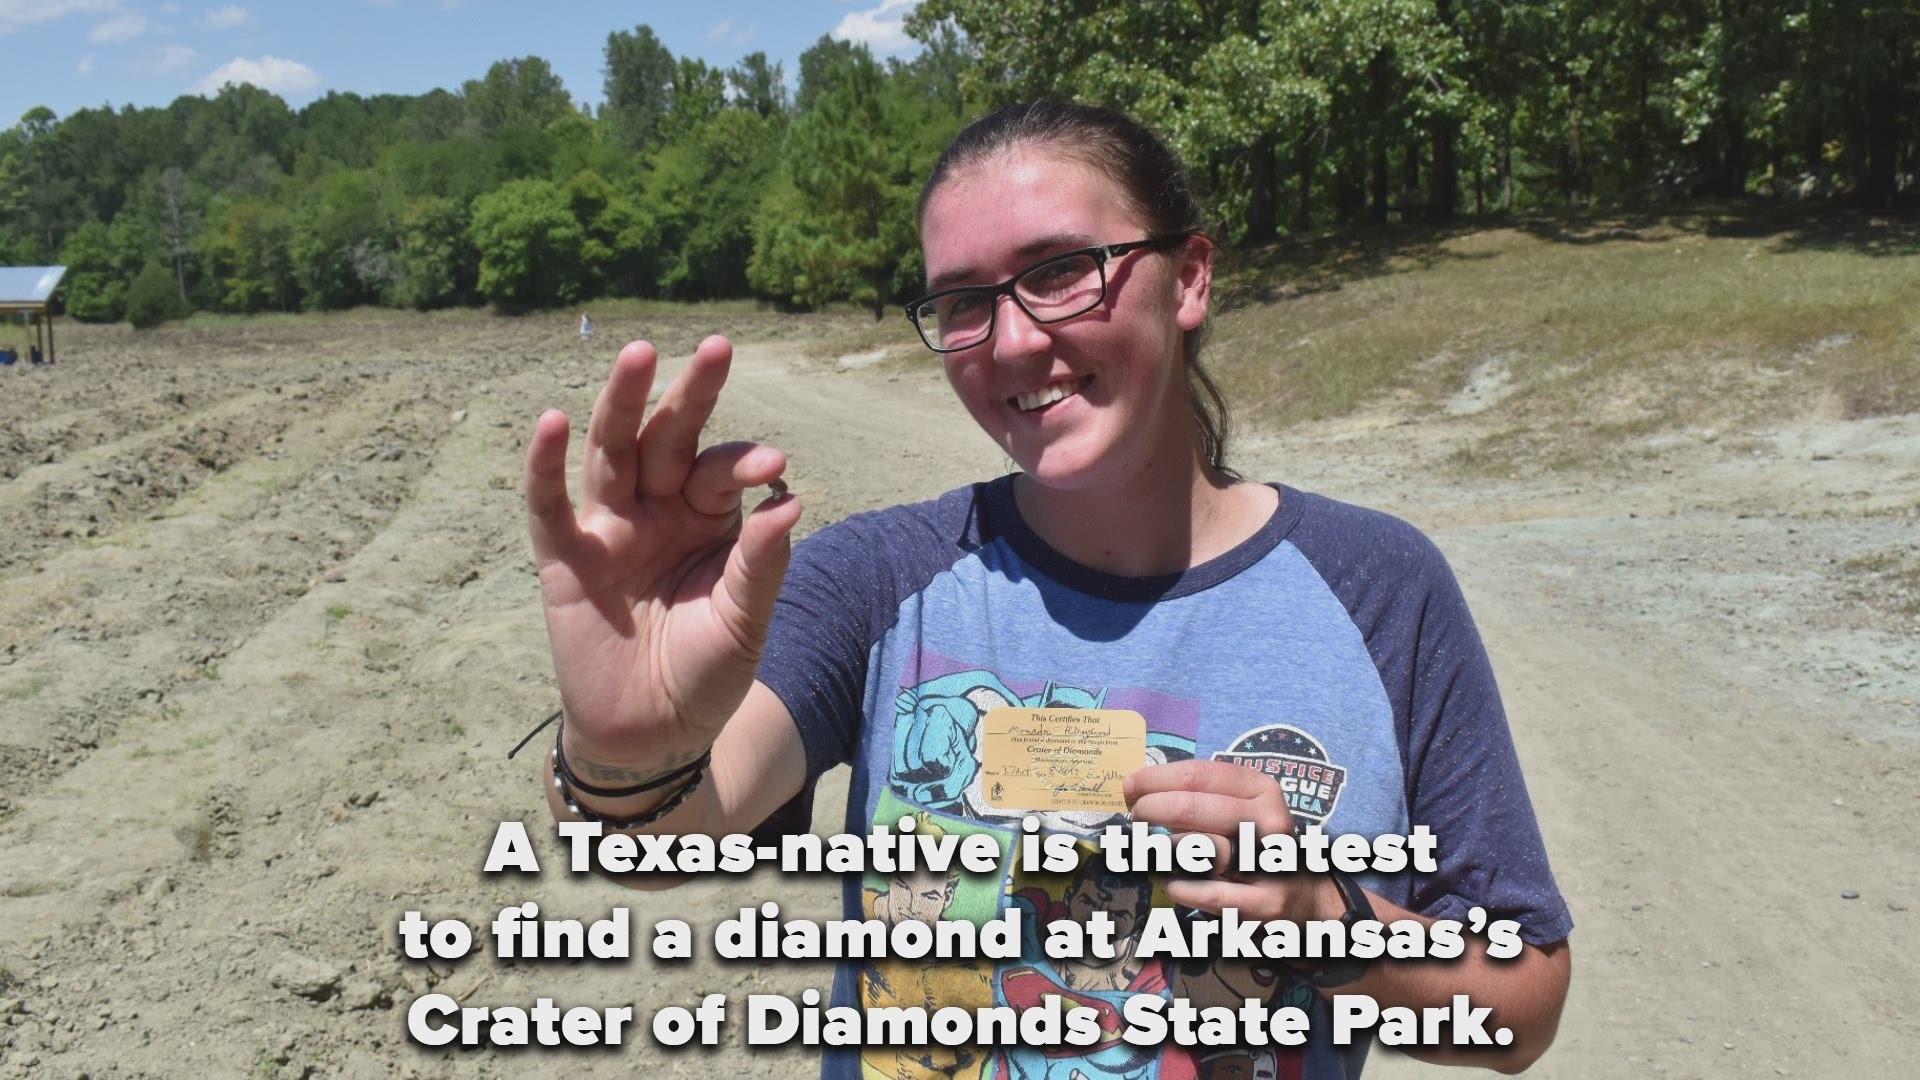 This is the largest diamond found at the state park since March 2017!